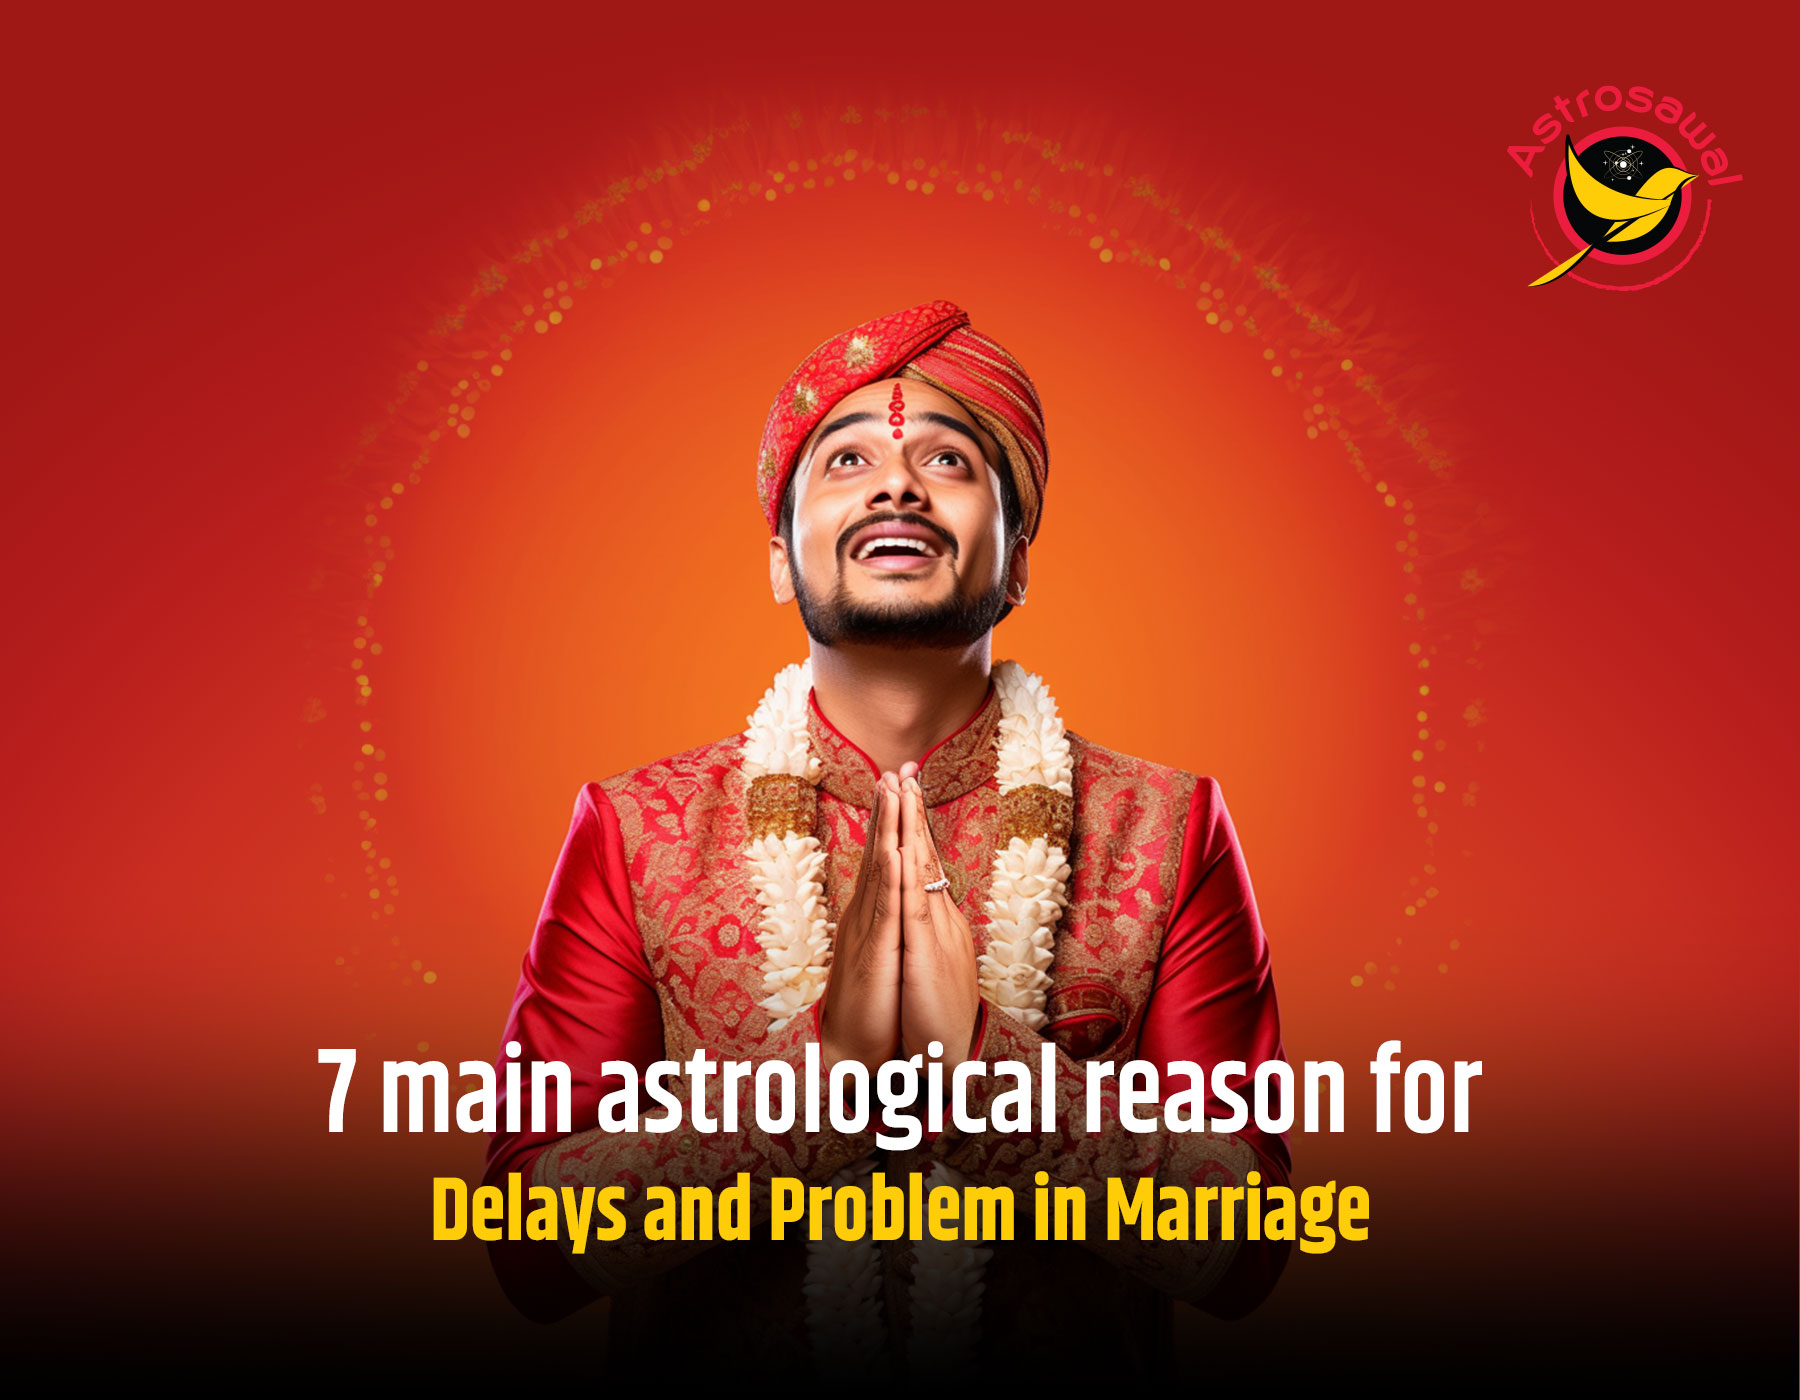 7 Astrological Reasons for Delays and Problems in Marriage